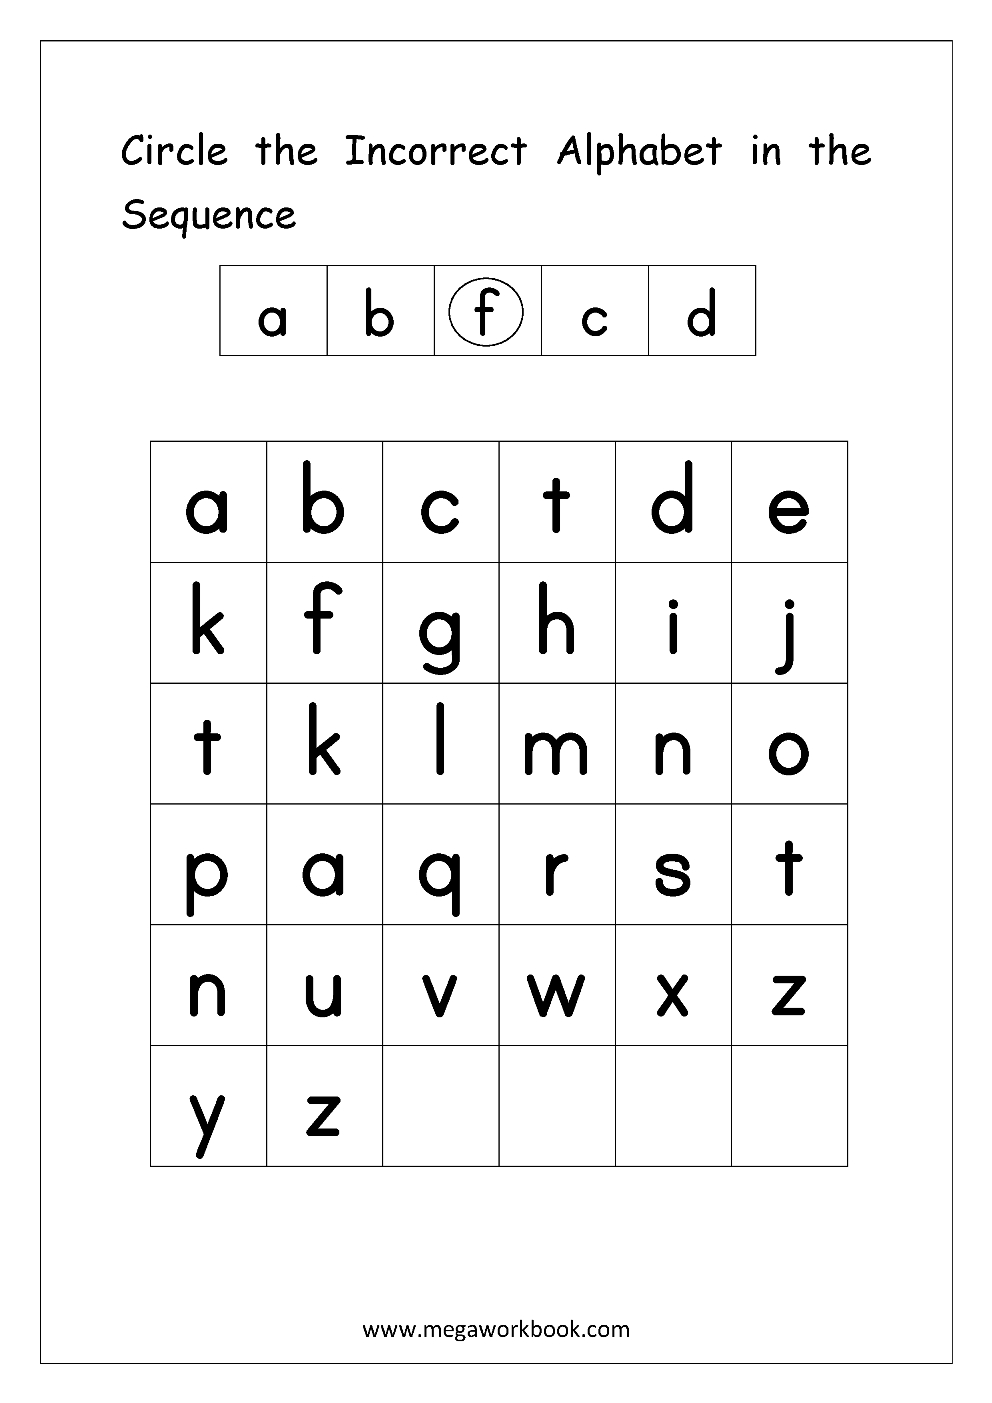 English Worksheets - Alphabetical Sequence | Free English intended for Alphabet Order Worksheets